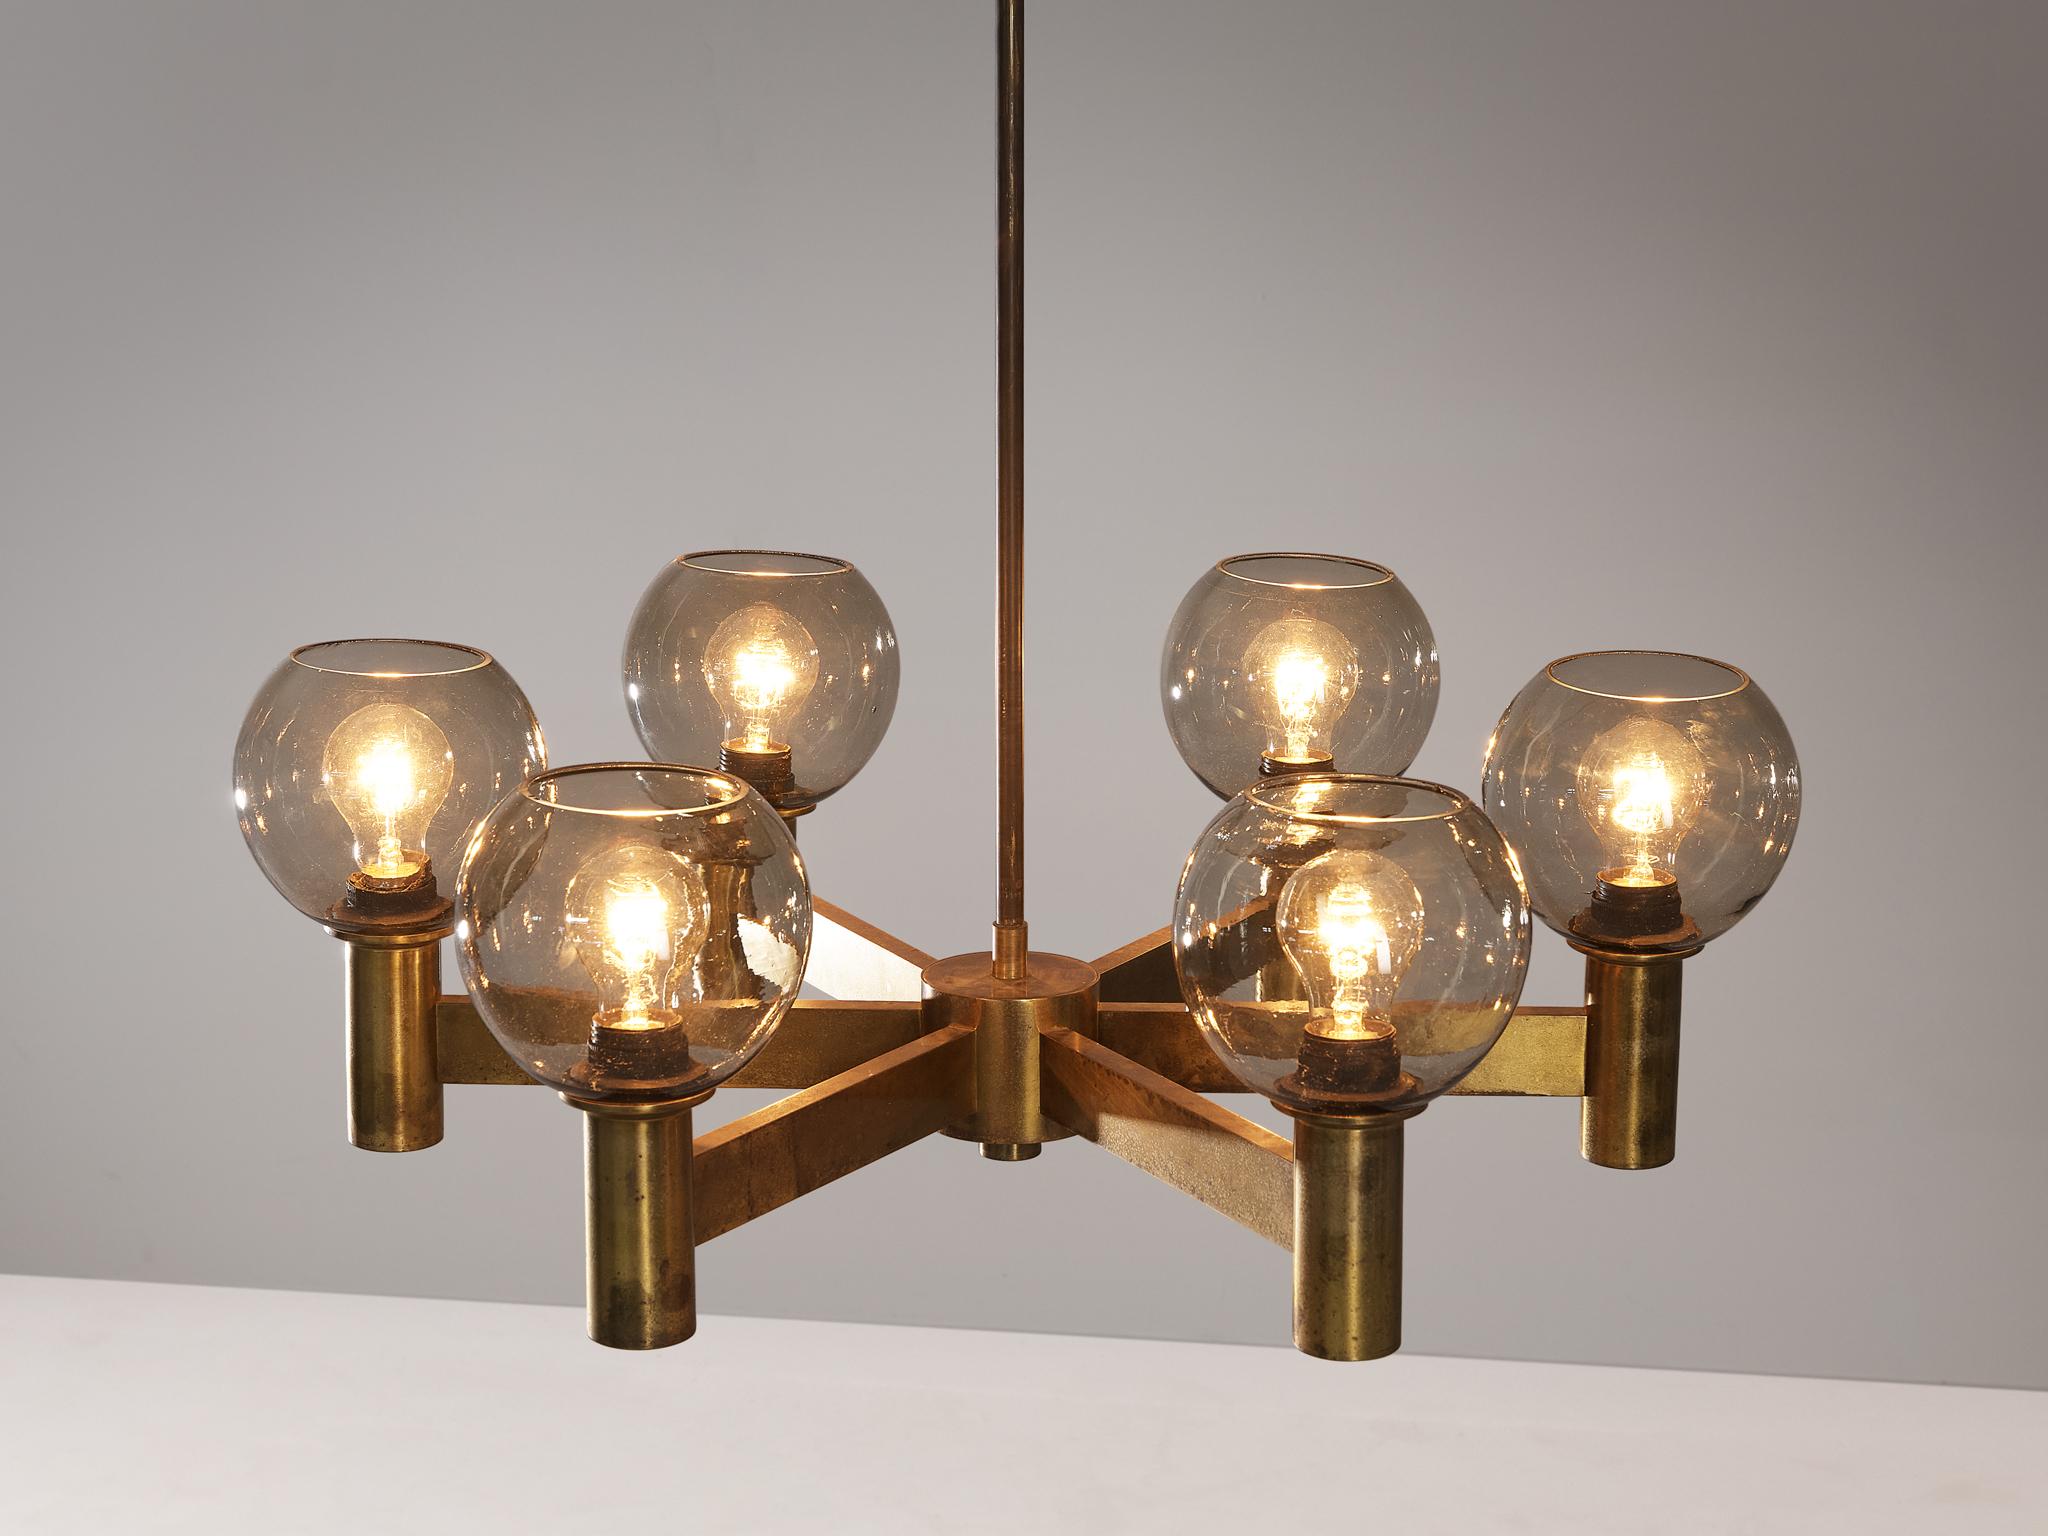 Chandelier, glass, brass, Sweden, 1960s. 

The patinated brass chandelier is designed with six arms, each elegantly paired with a glass bulb. The spatial arrangement of the shades allows for an even distribution of light throughout the room. The